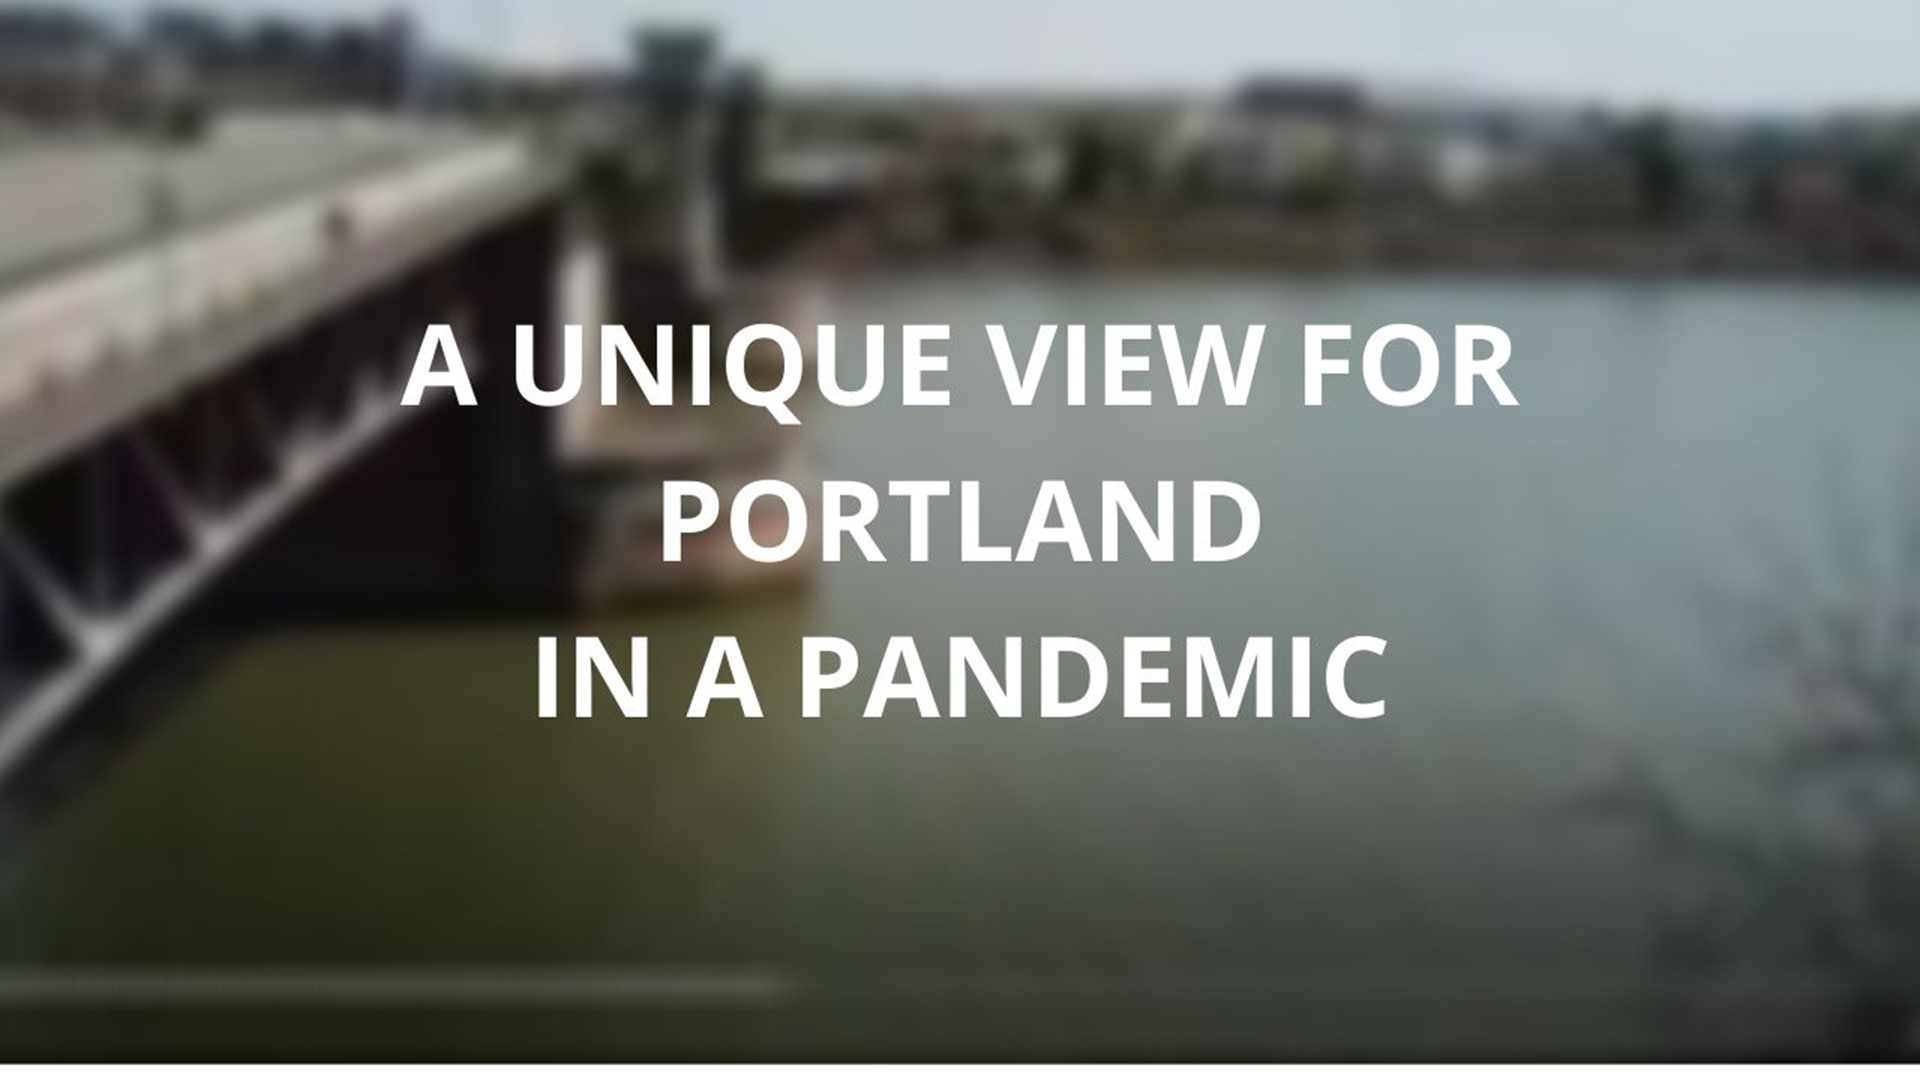 Multnomah County’s lead bridge operator offers a thought-provoking perspective of her city during a pandemic, seen from 30 feet above it.